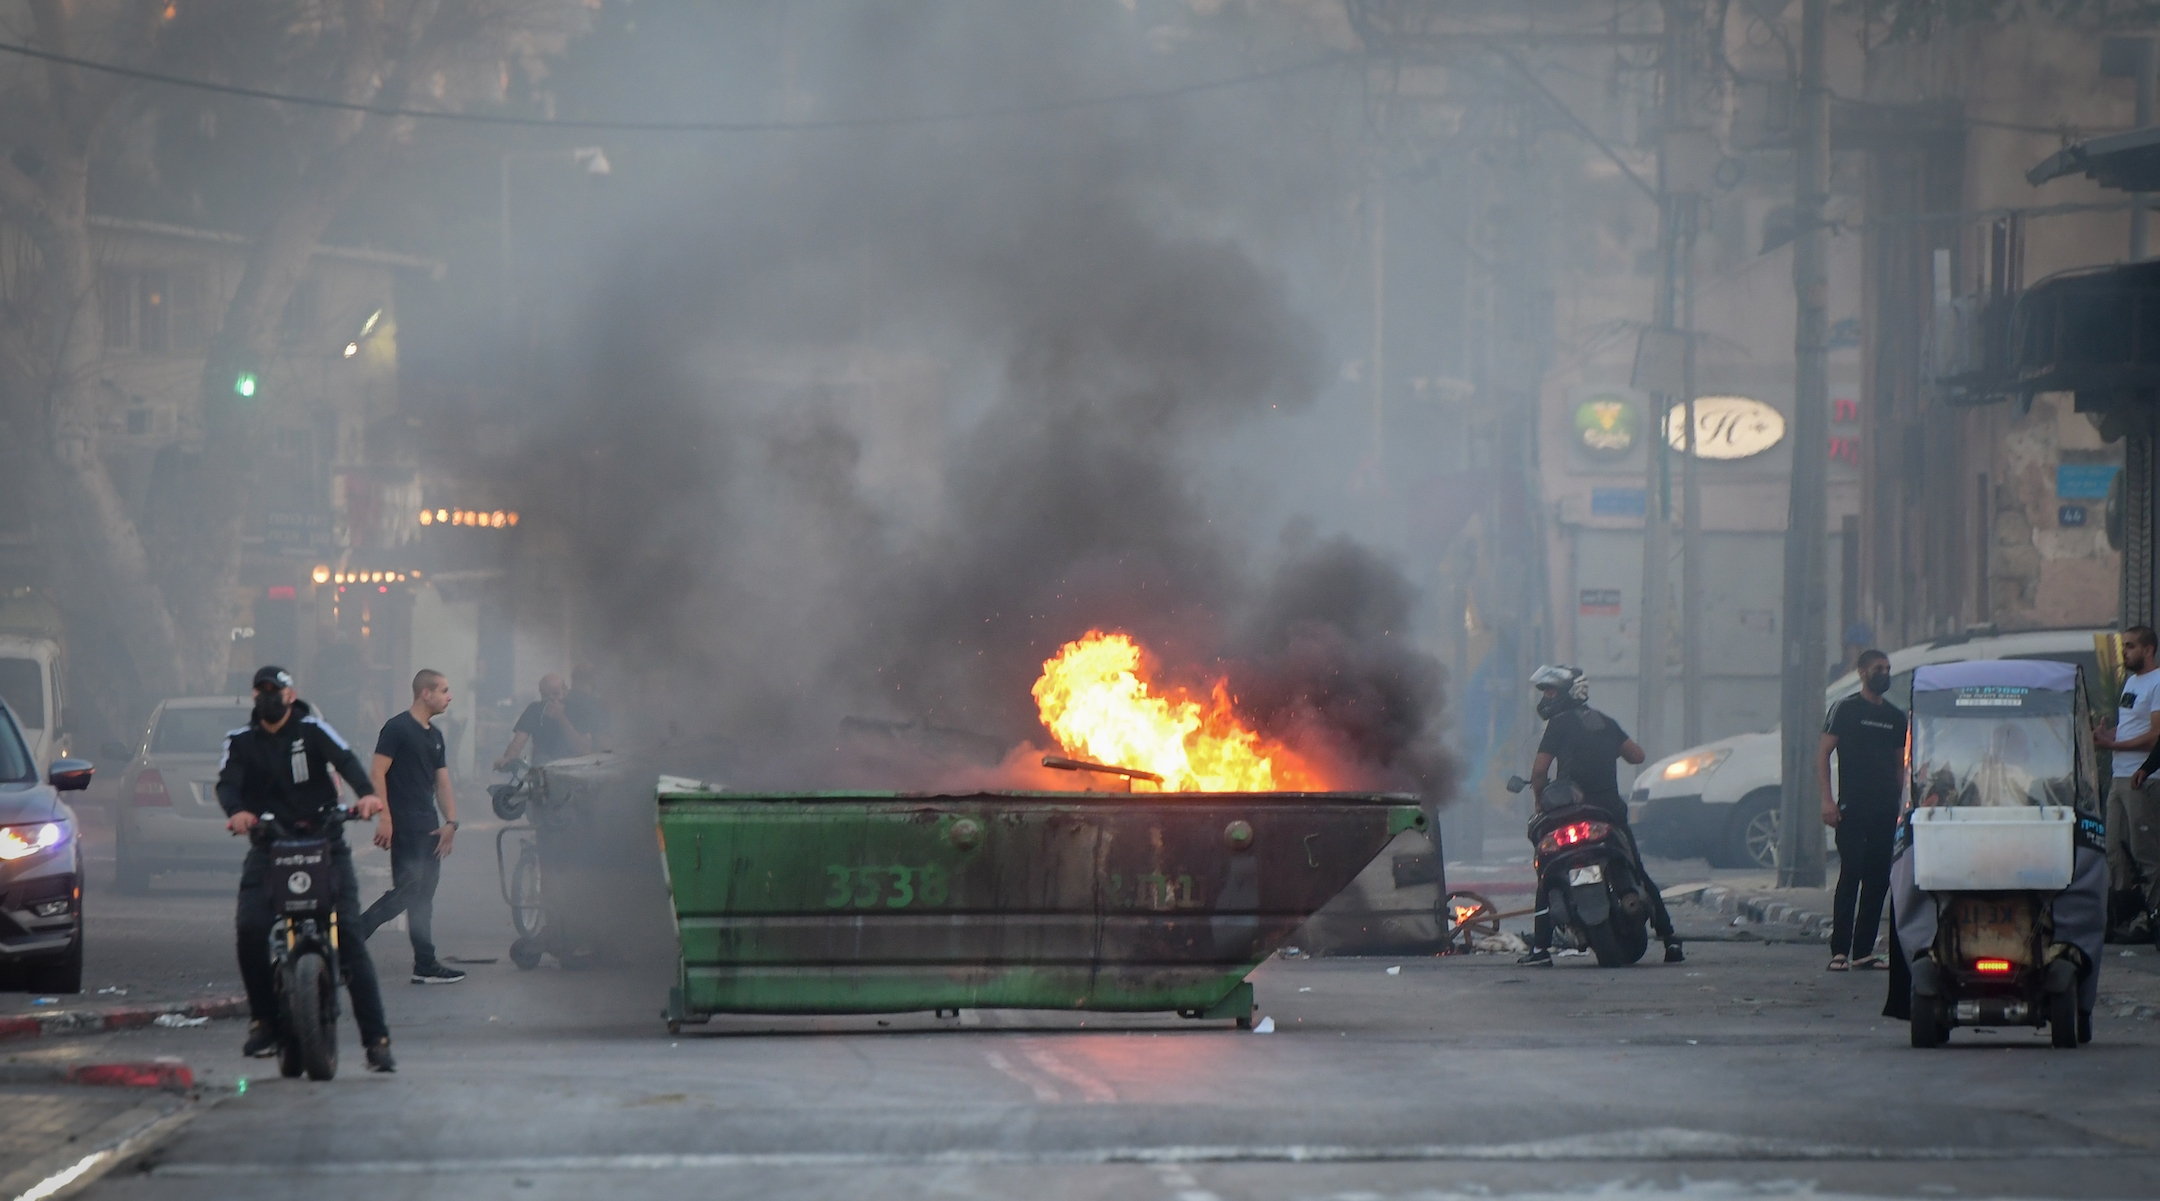 A dumpster set on fire in Yafo amid violent protests across Israel on May 11, 2021. (Avshalom Sassoni/FLASH90)